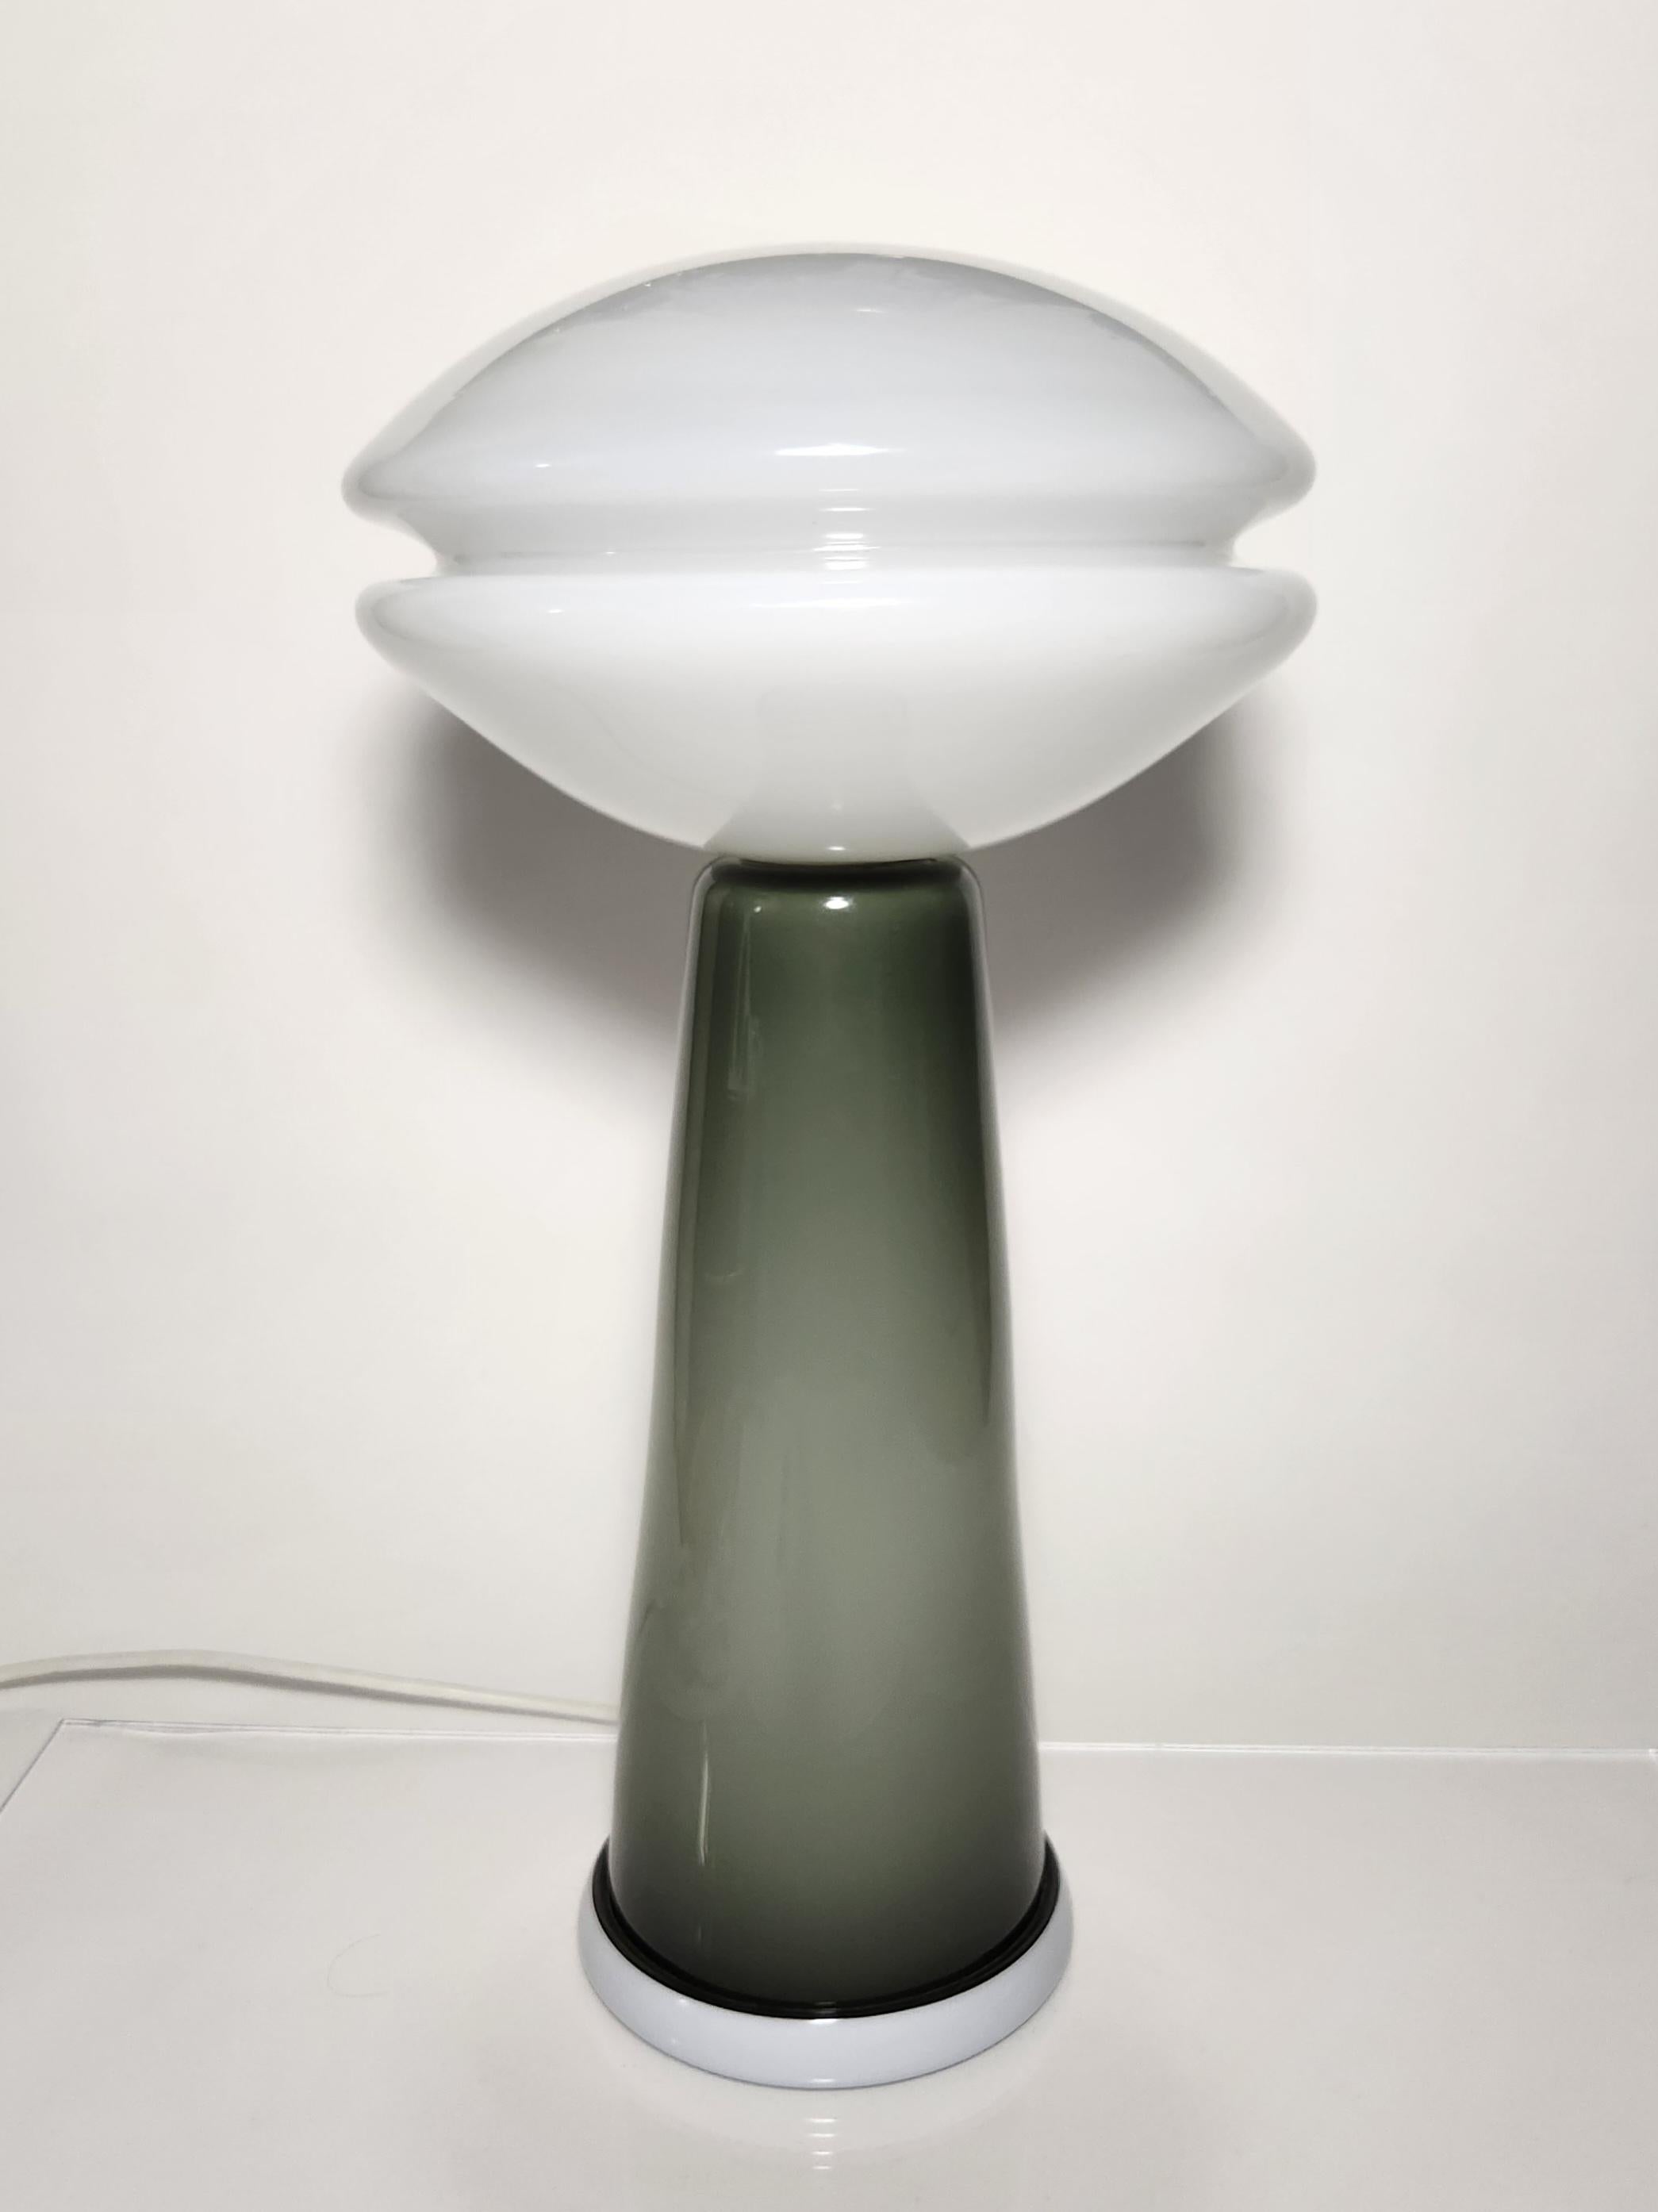 The Groove Series Table Lamps are the newest design in this popular series featuring the signature groove embedded in blown glass forms. Combining a modern aesthetic with minimalist color sensibility, these table lights add a futuristic feel to any